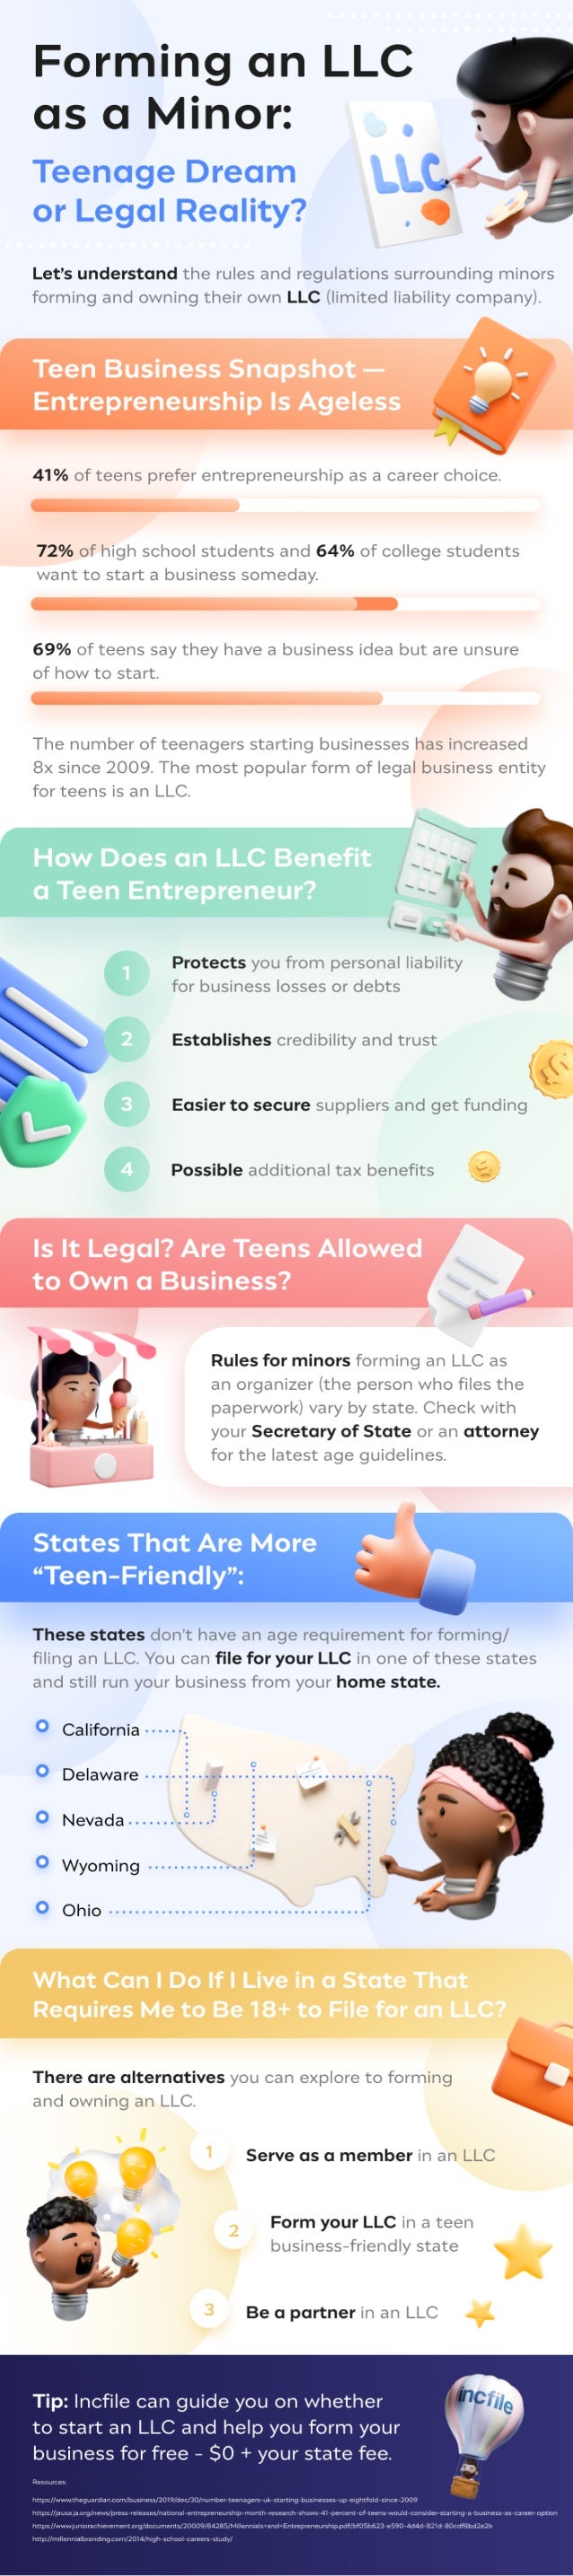 Forming an LLC as a Teenage or Minor